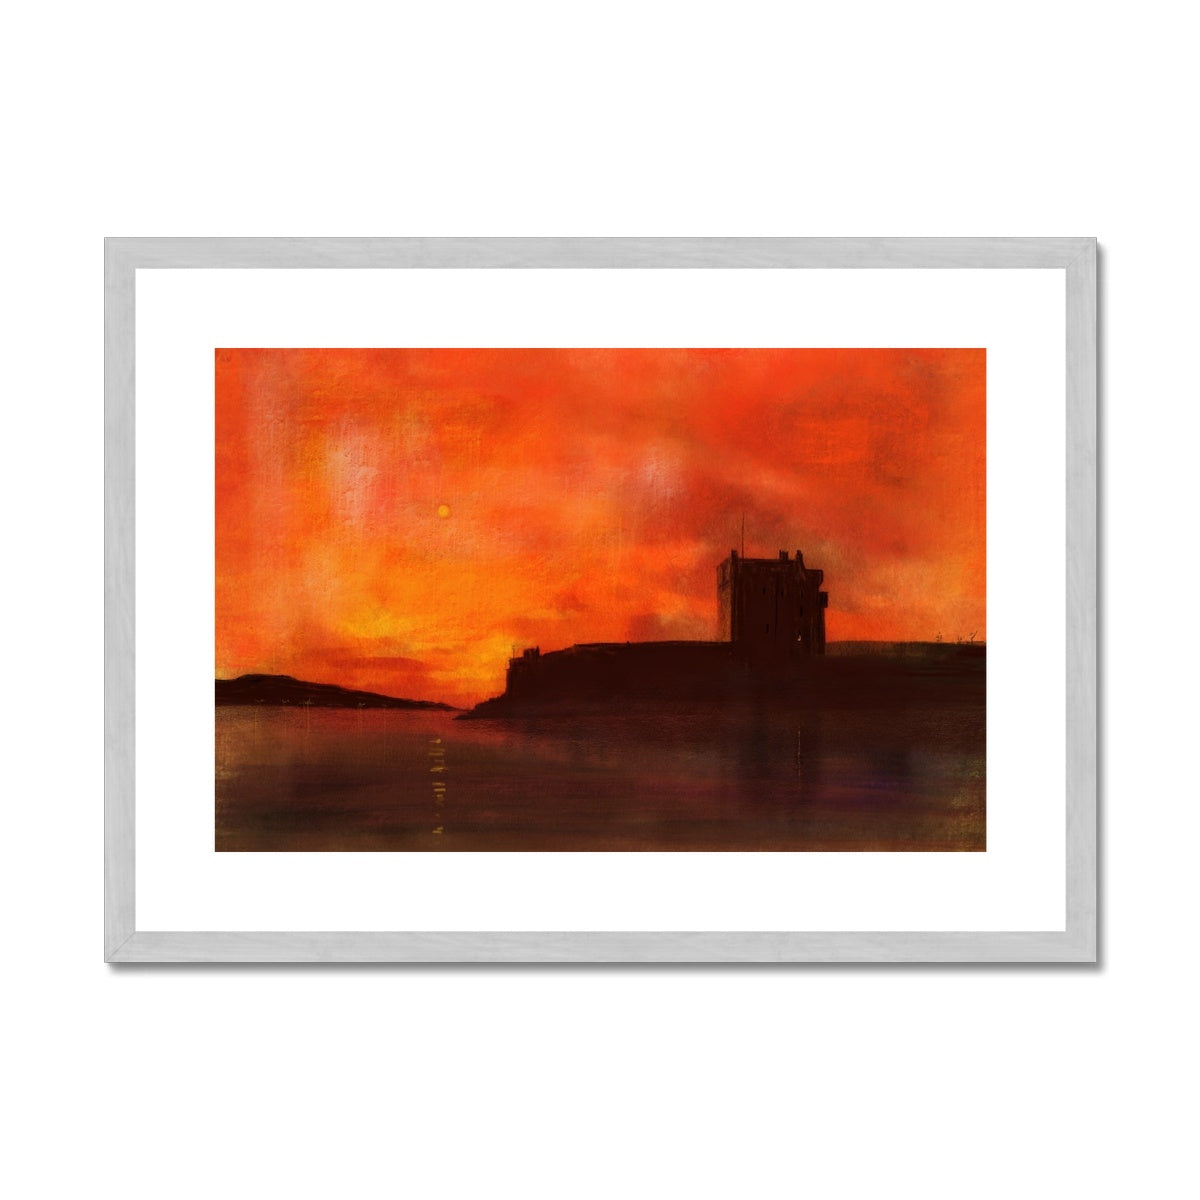 Broughty Castle Sunset Painting | Antique Framed & Mounted Prints From Scotland-Antique Framed & Mounted Prints-Historic & Iconic Scotland Art Gallery-A2 Landscape-Silver Frame-Paintings, Prints, Homeware, Art Gifts From Scotland By Scottish Artist Kevin Hunter